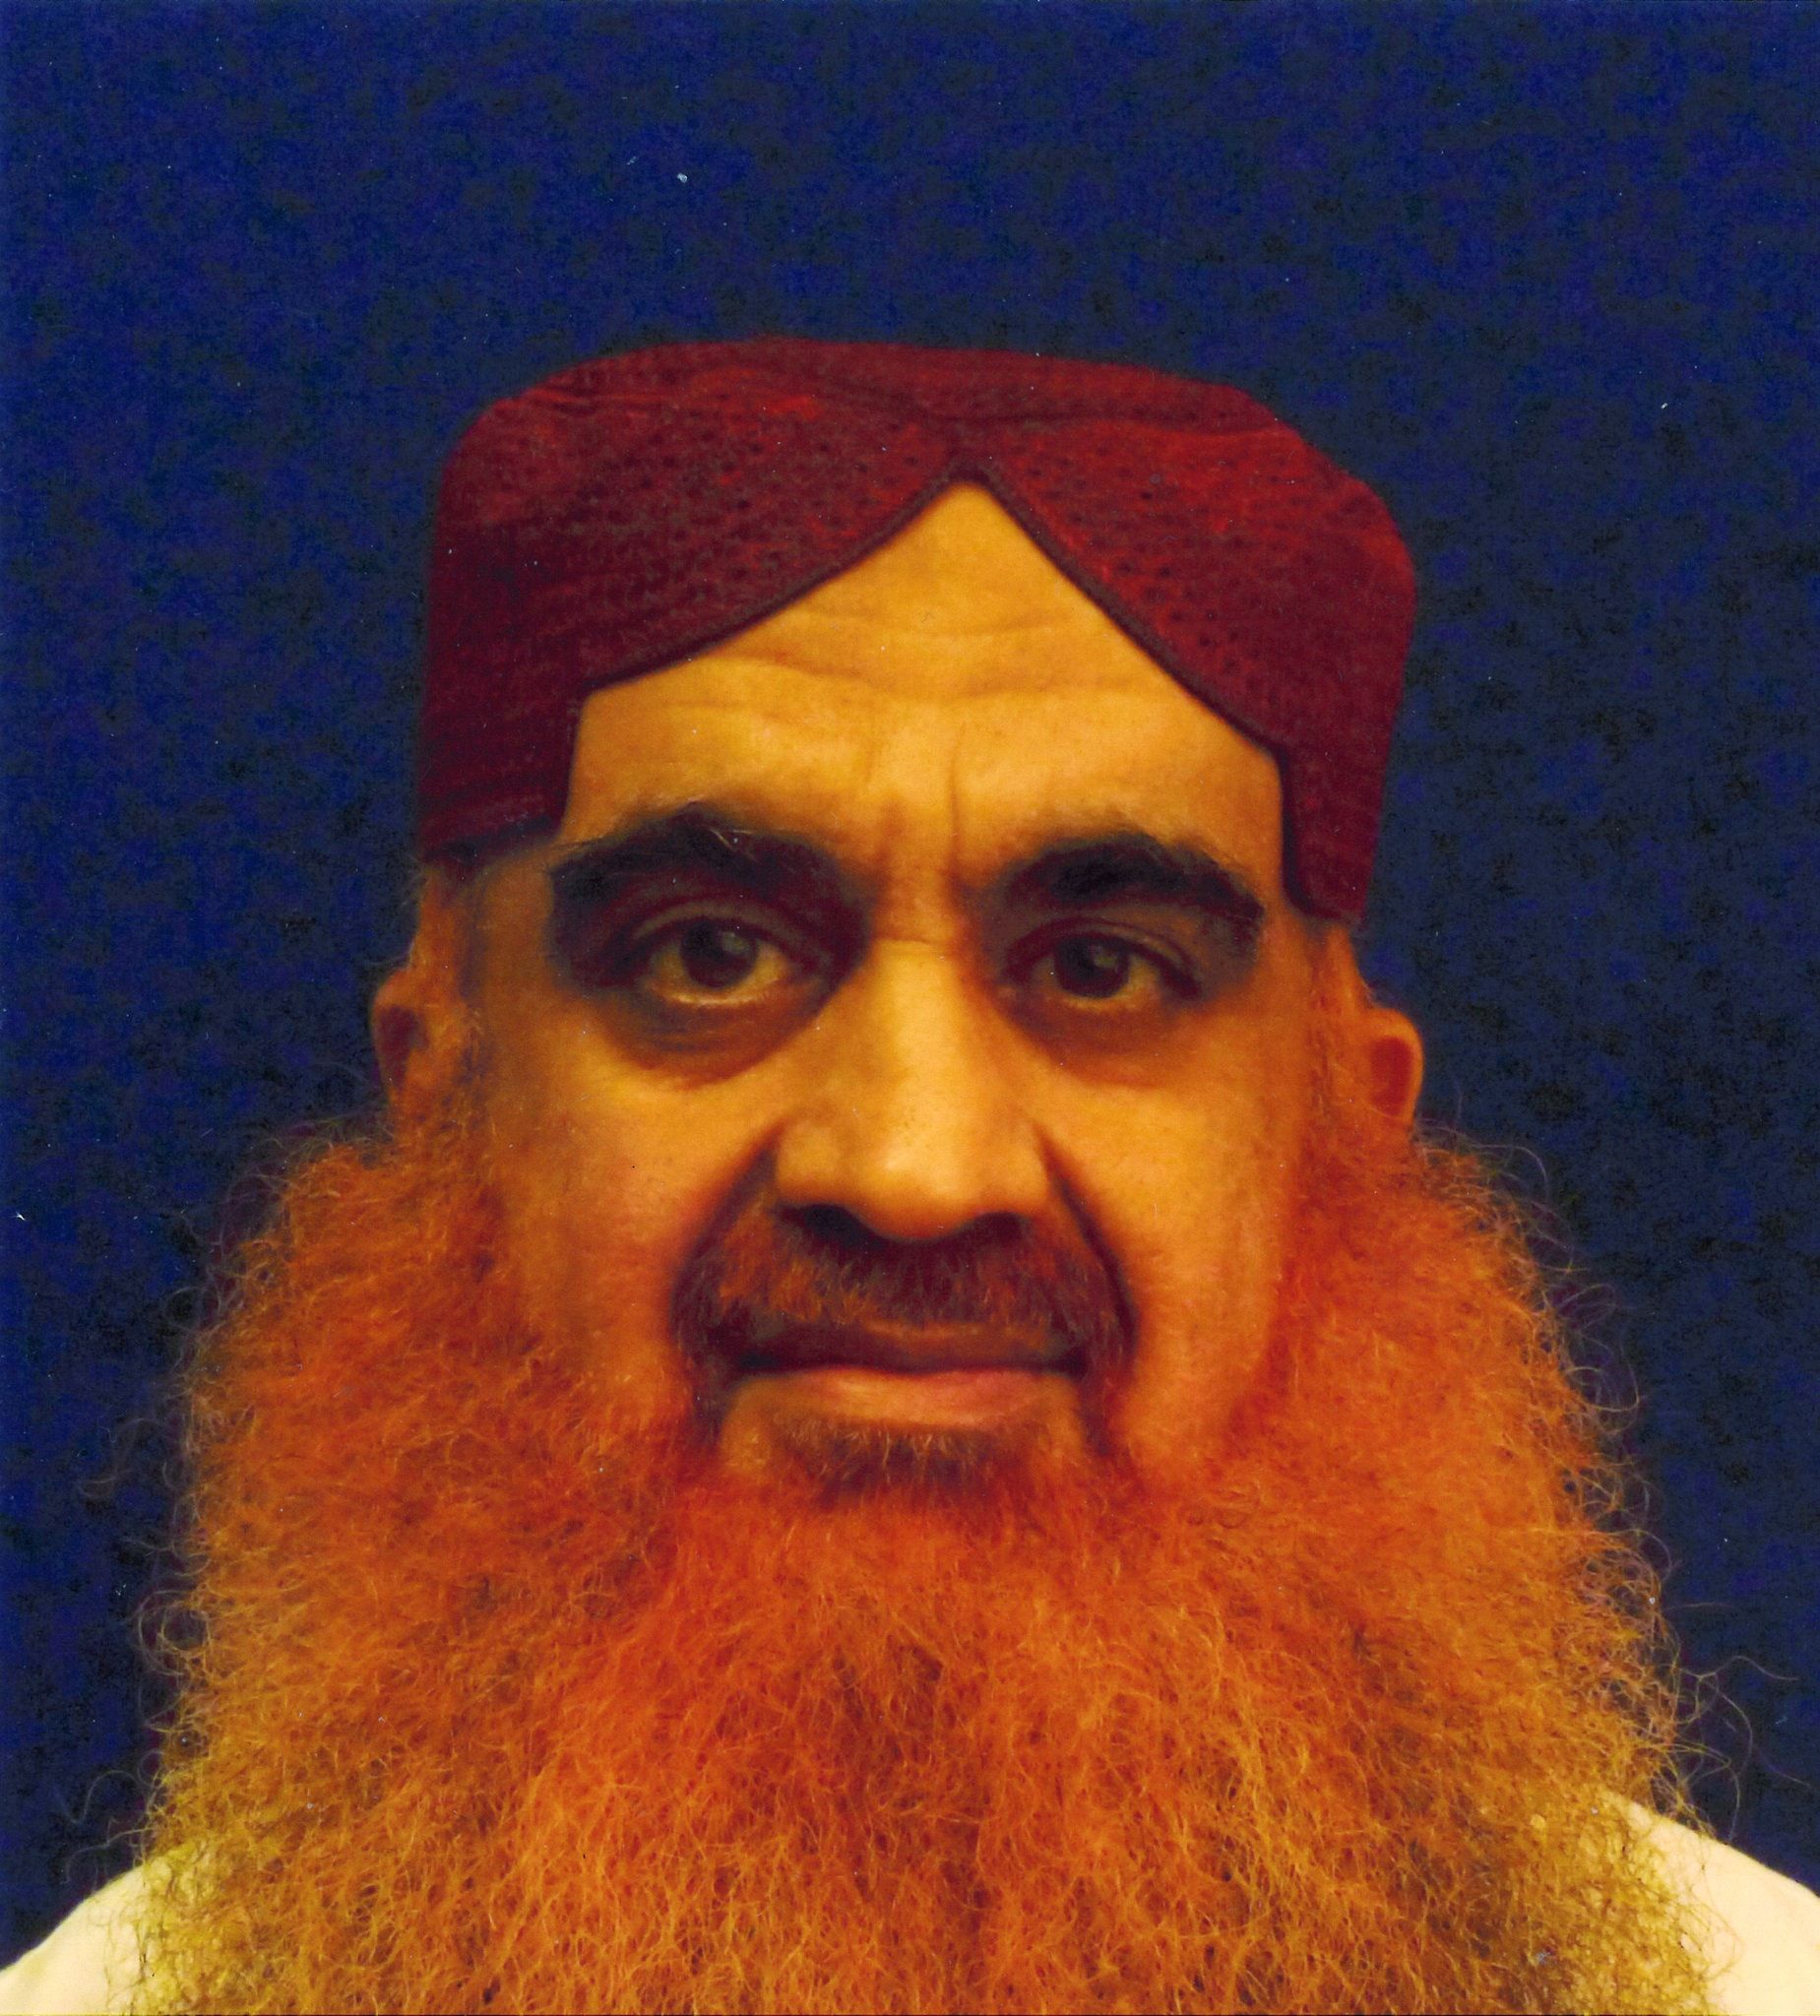 Khalid Shaikh Mohammed in a recent photo provided by his lawyer. Image courtesy of The New York Times.